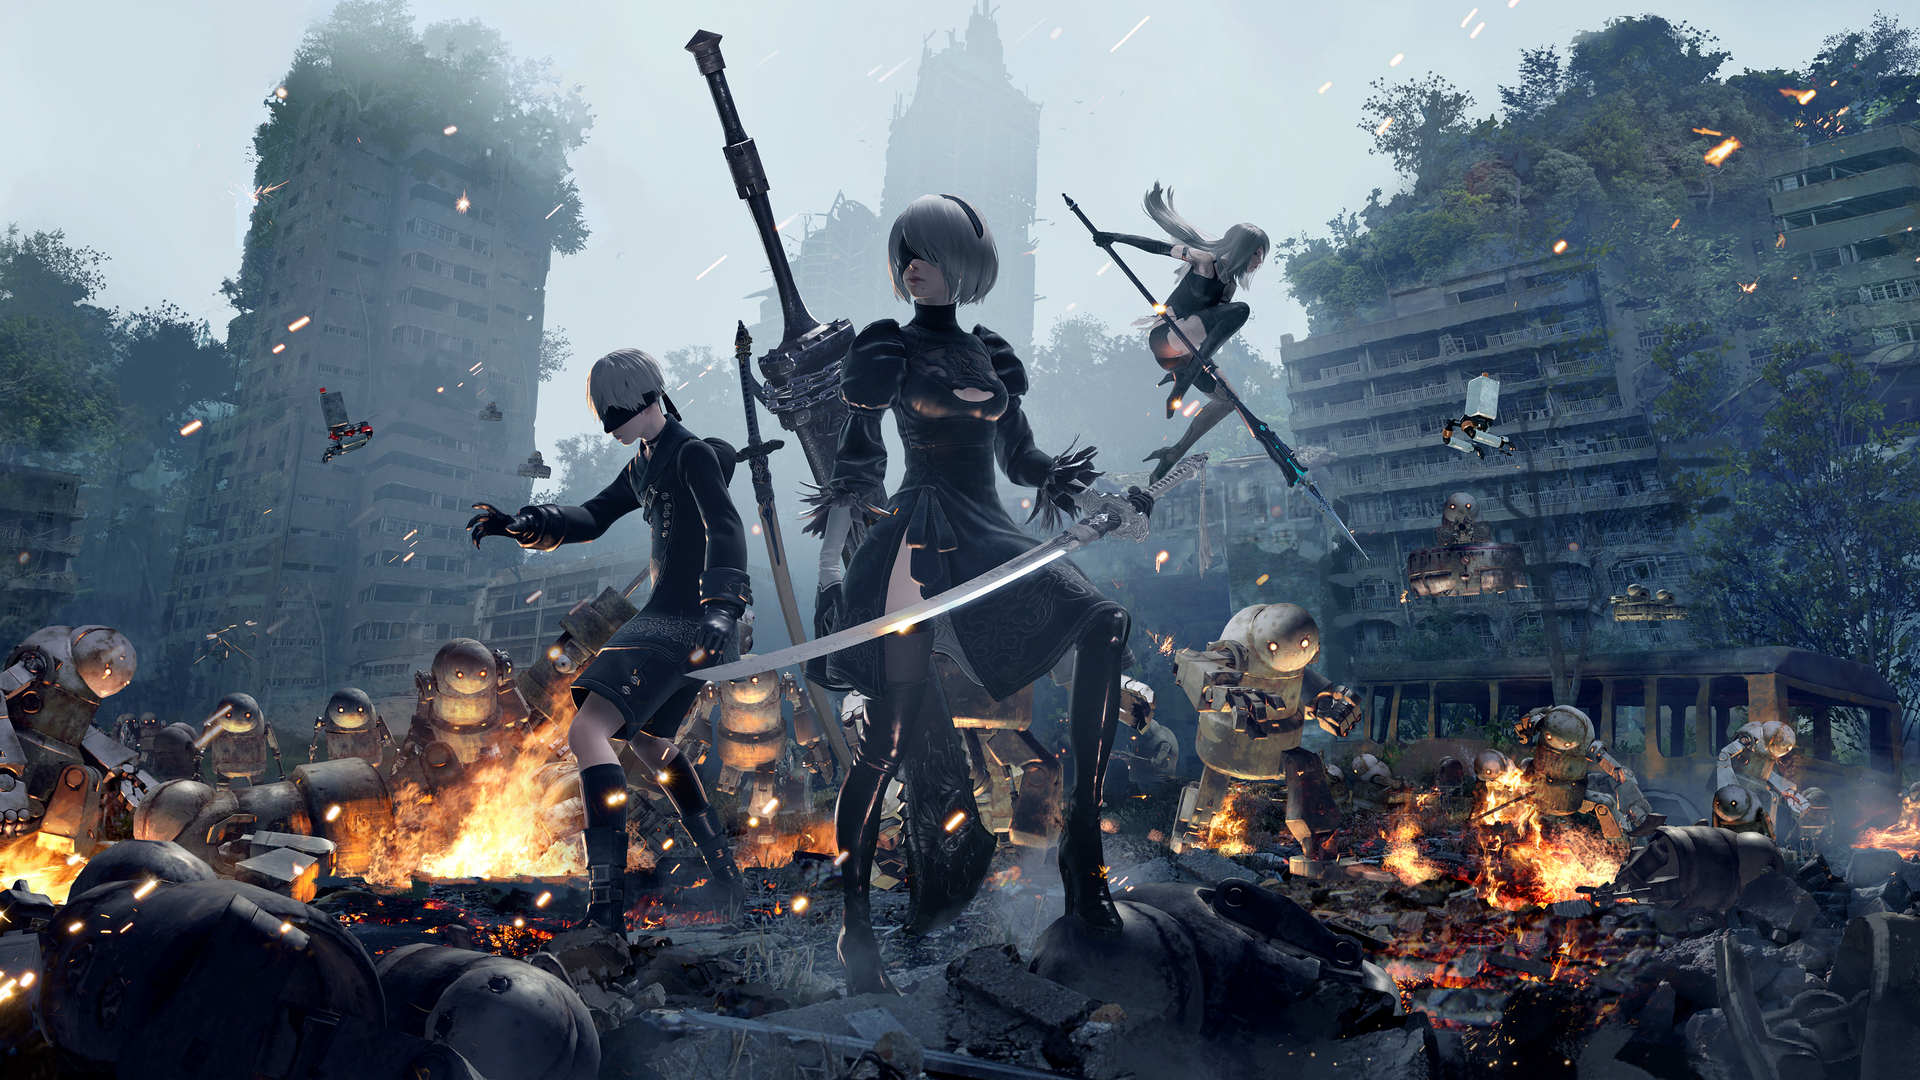 Free Download Mb9s 2b And Wallpaper From Nier Automata Gamepressurecom 19x1080 For Your Desktop Mobile Tablet Explore 31 Wallpaper Wallpaper